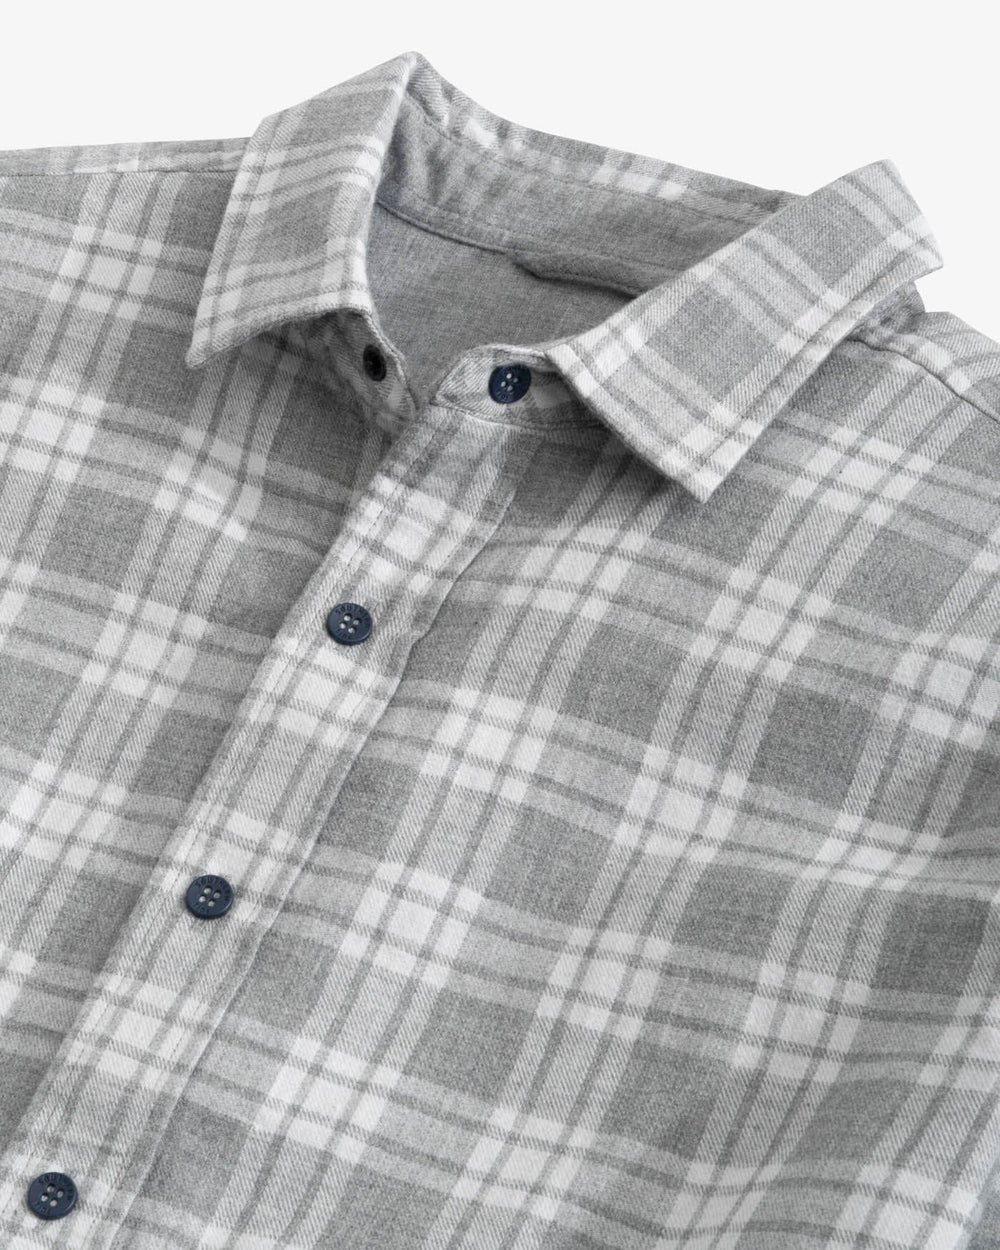 The detail view of the Southern Tide Heather Melbourne Reversible Plaid Sport Shirt by Southern Tide - Heather Shadow Grey